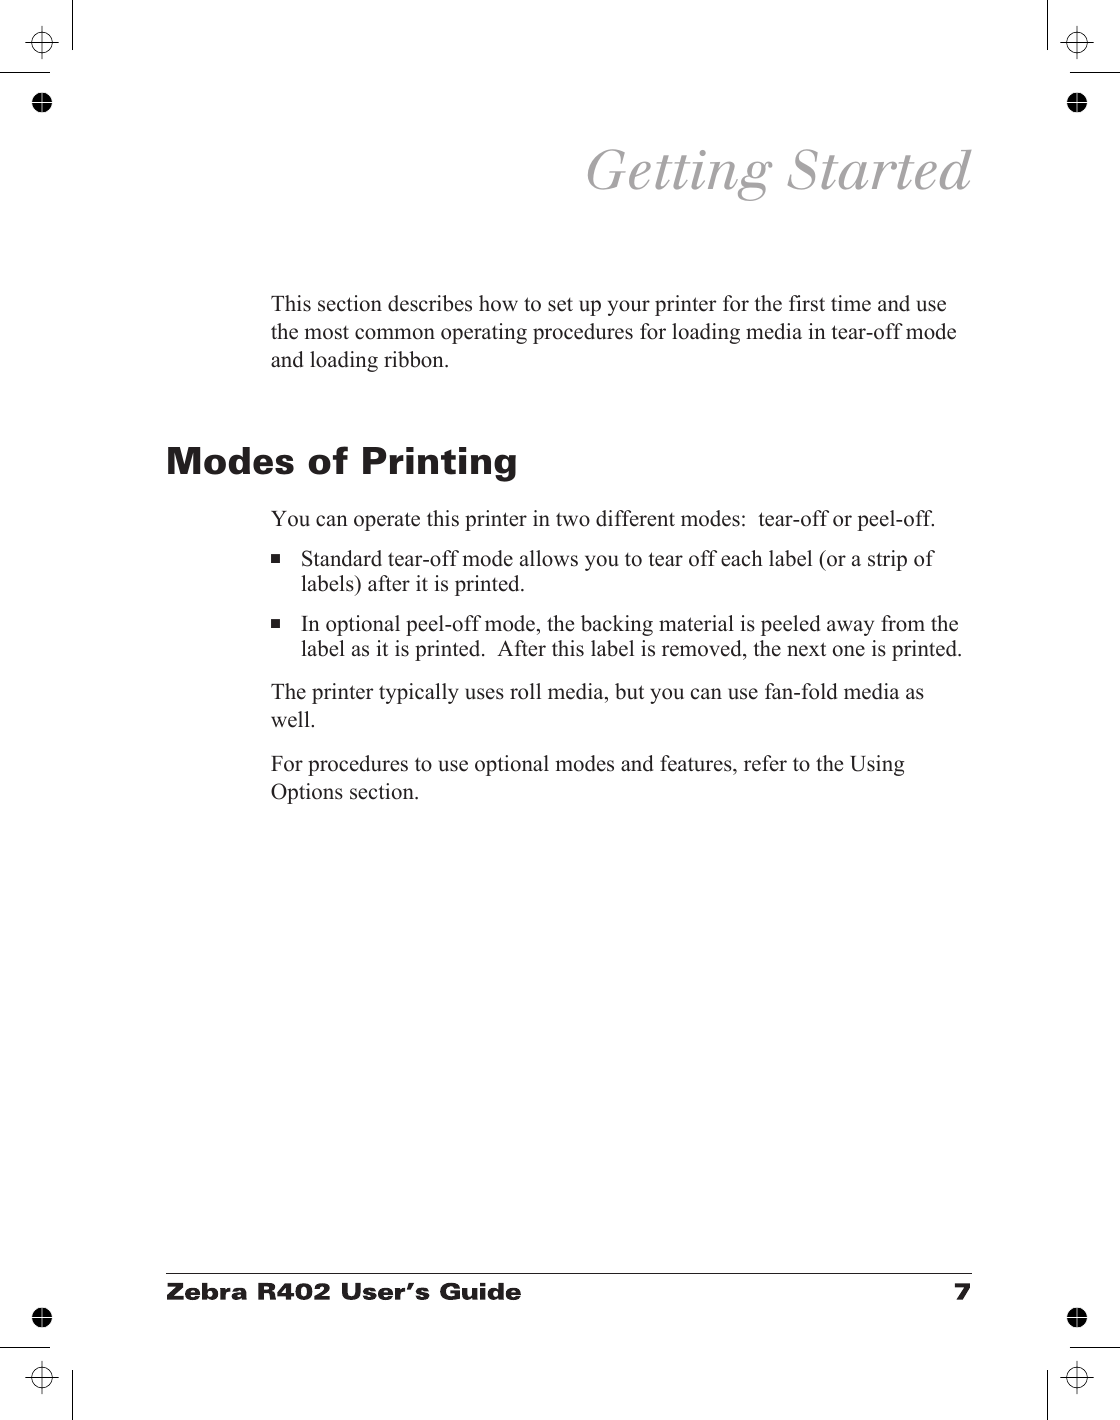 Getting StartedThis section describes how to set up your printer for the first time and usethe most common operating procedures for loading media in tear-off modeand loading ribbon.Modes of PrintingYou can operate this printer in two different modes:  tear-off or peel-off.■Standard tear-off mode allows you to tear off each label (or a strip oflabels) after it is printed.■In optional peel-off mode, the backing material is peeled away from thelabel as it is printed.  After this label is removed, the next one is printed.The printer typically uses roll media, but you can use fan-fold media aswell.For procedures to use optional modes and features, refer to the UsingOptions section.